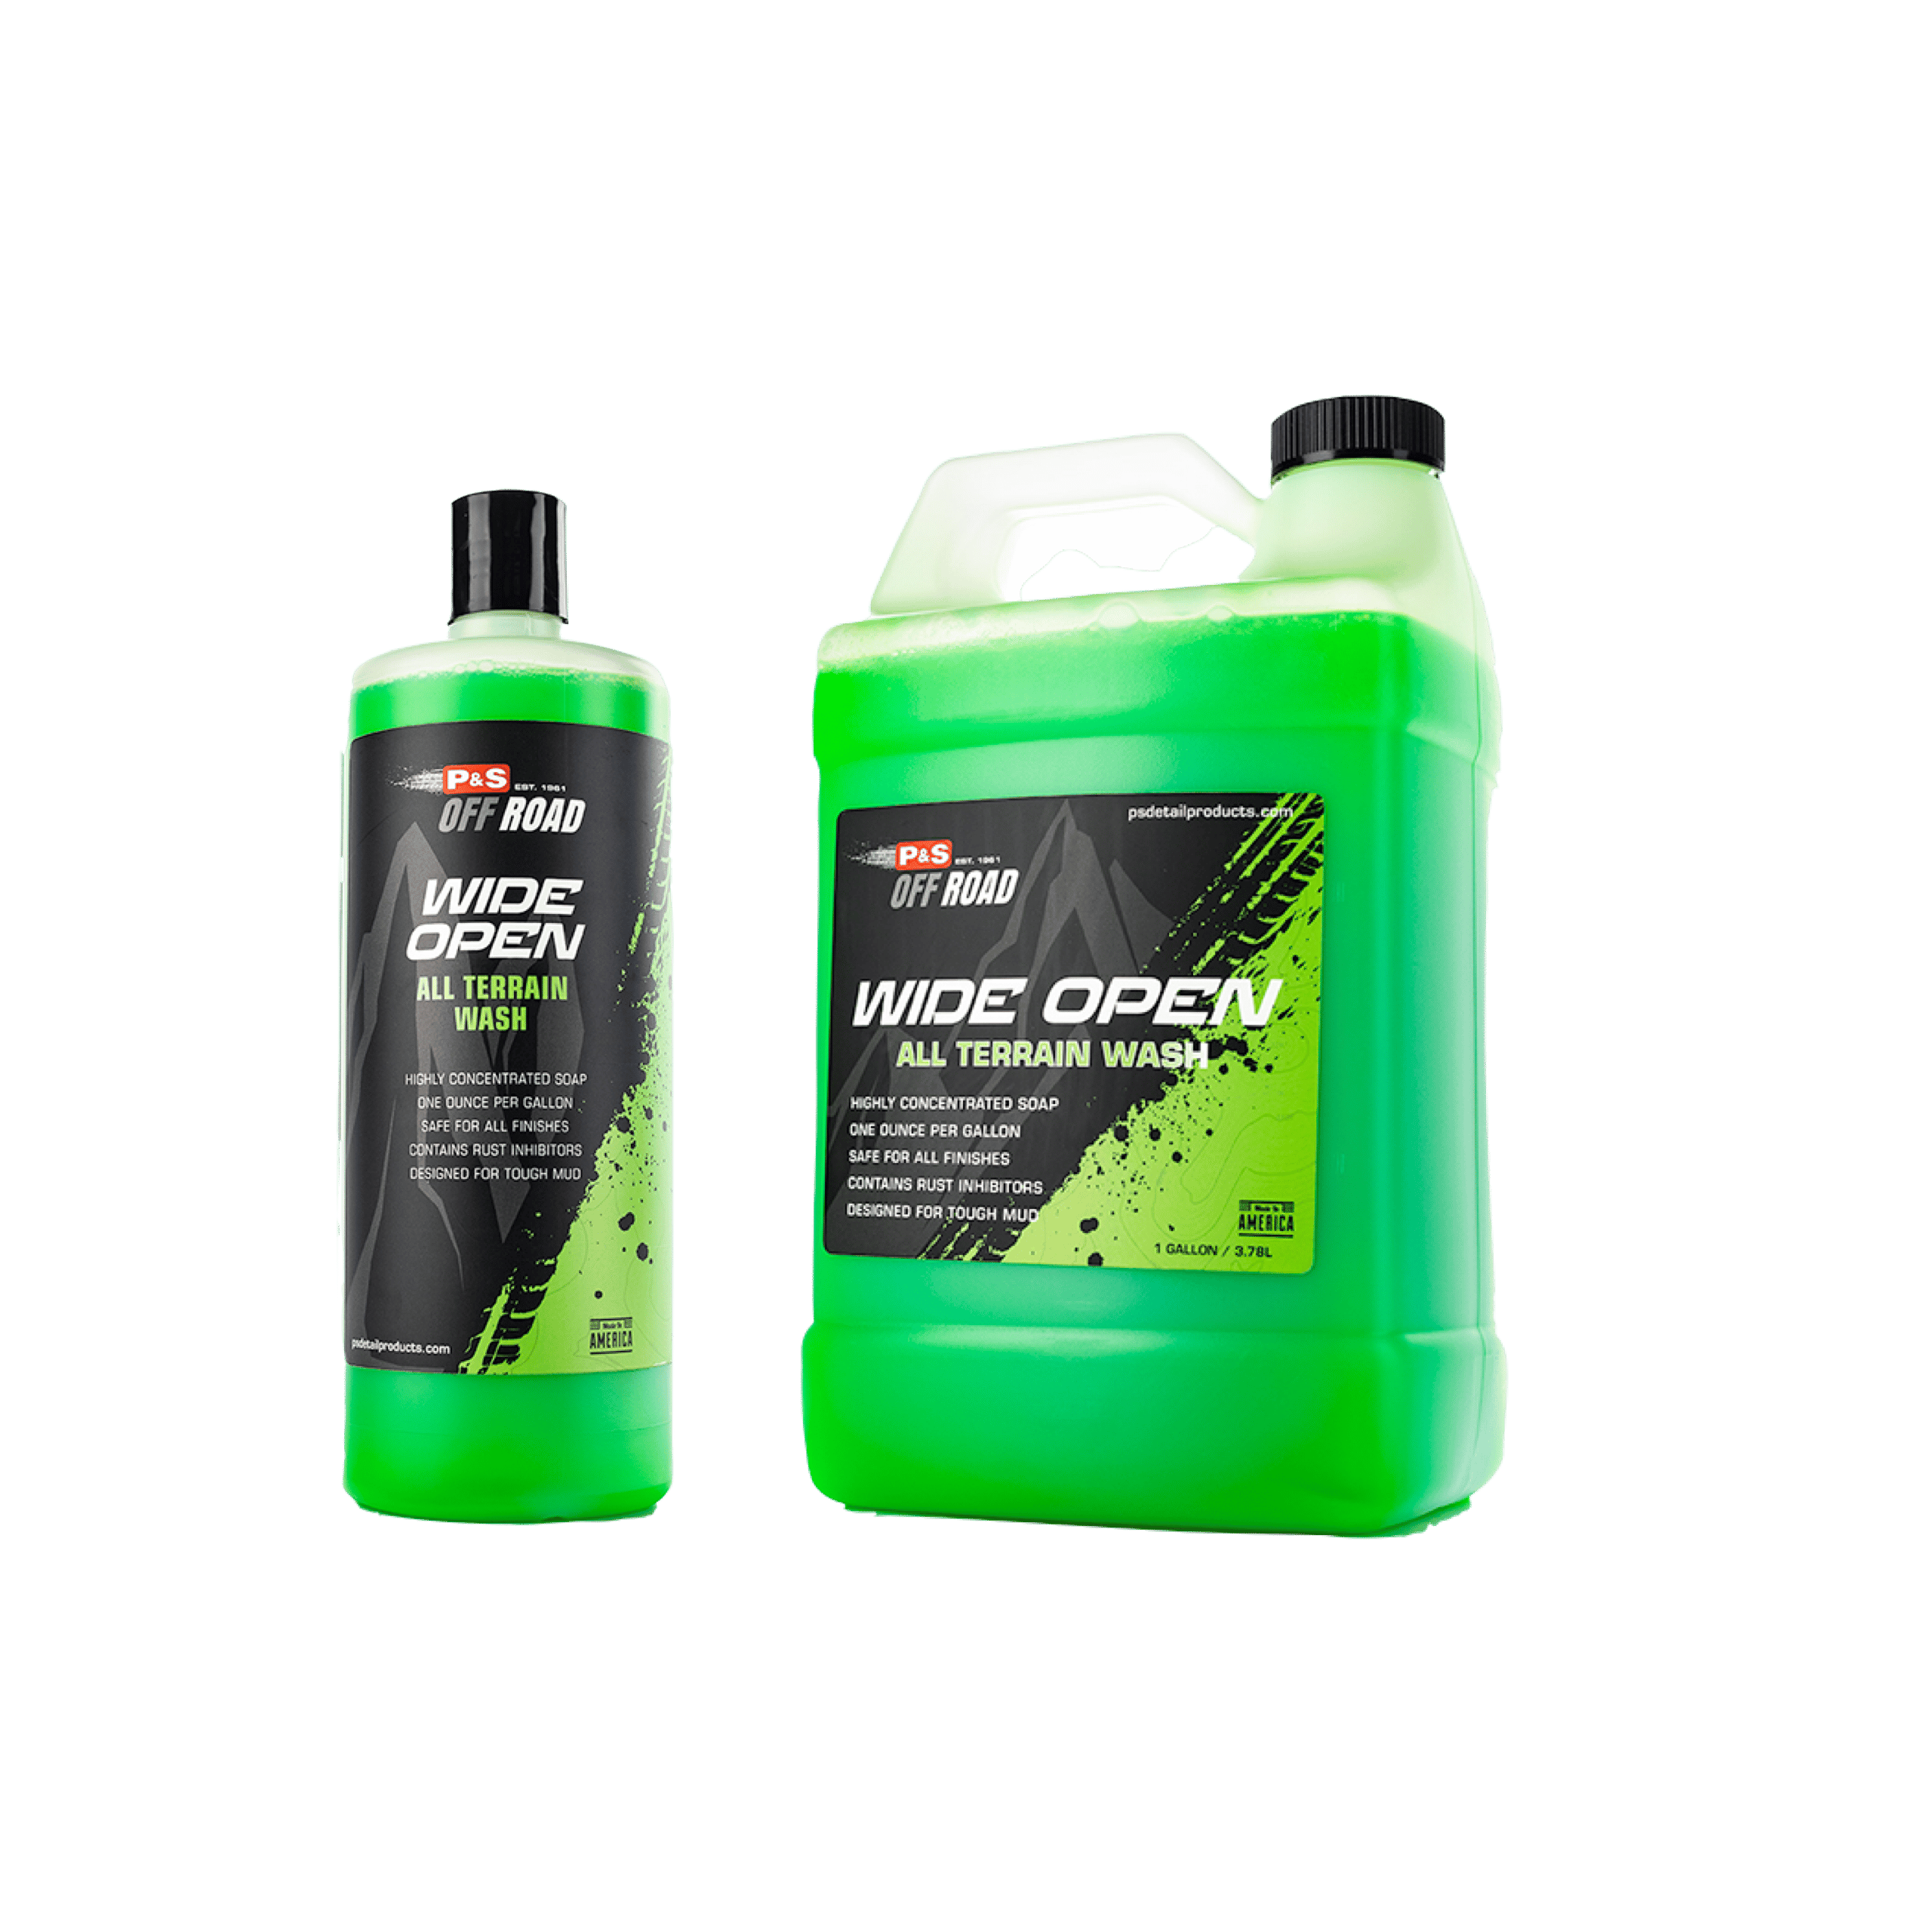 Product Review: P&S Off Road Wide Open All Terrain Wash – Ask a Pro Blog